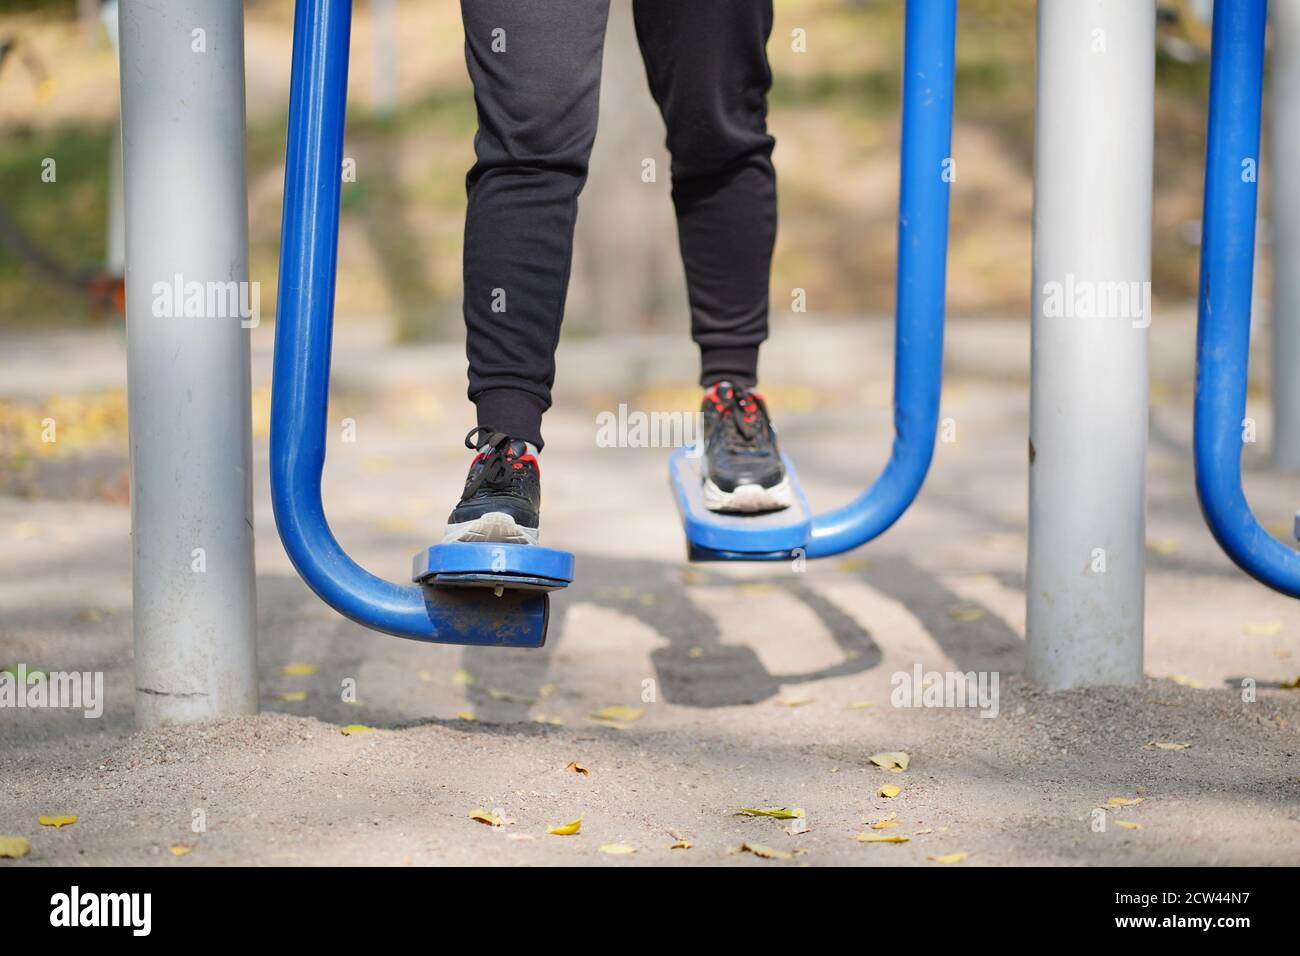 Portrait of woman's legs on street simulator in park. Close up of body part of female doing sports on athletic field in autumn season Stock Photo